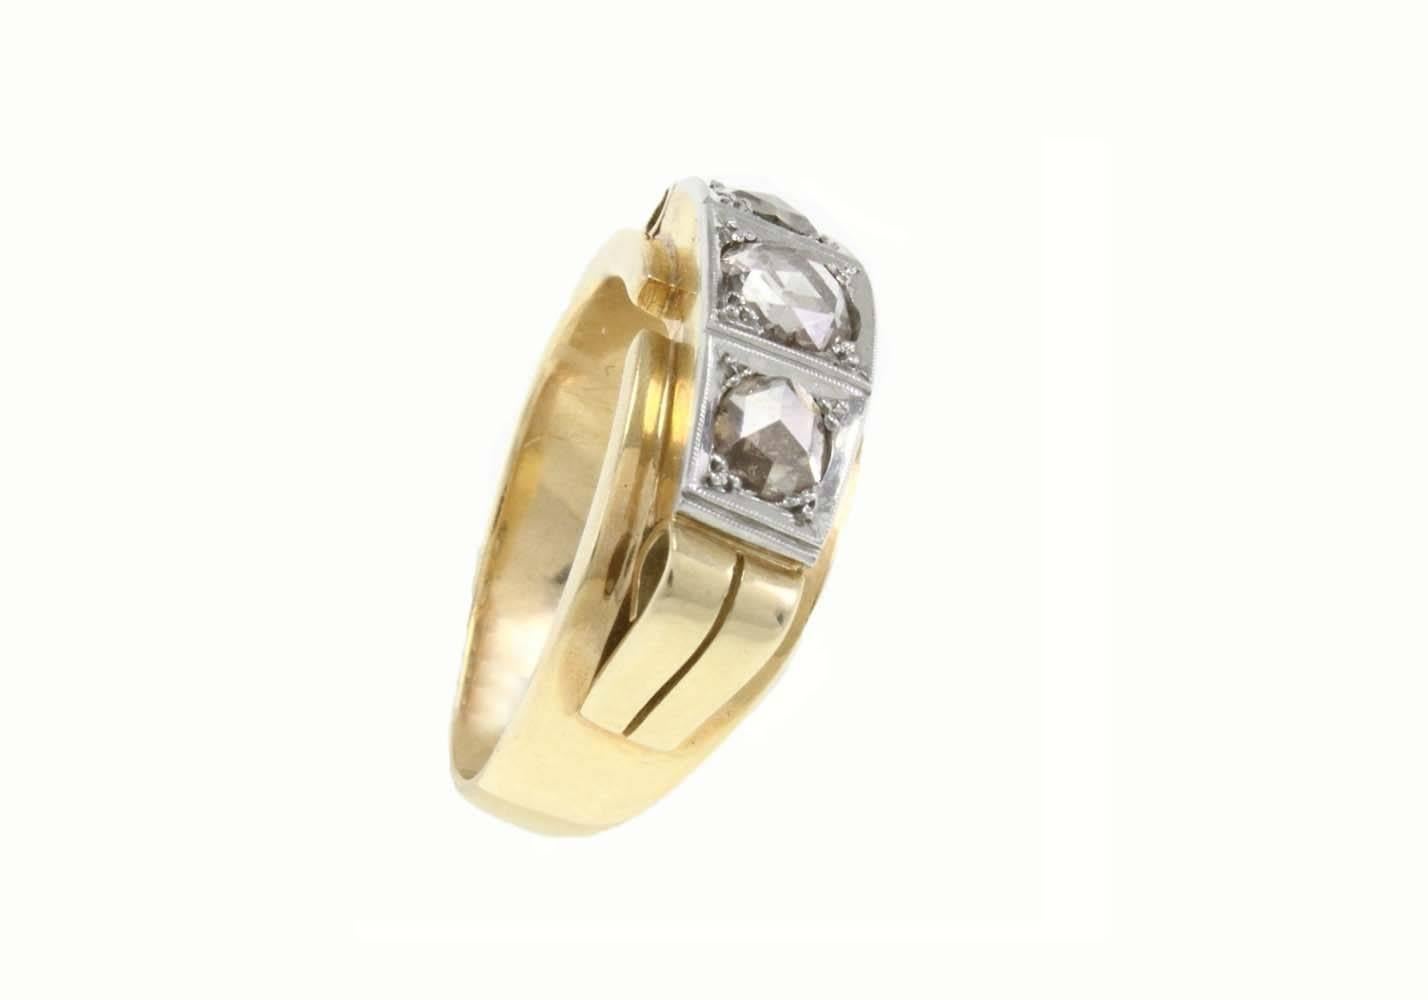 shipping policy: 
No additional costs will be added to this order.
Shipping costs will be totally covered by the seller (customs duties included). 

Magnificent '50 ring in 18Kt yellow gold composed of 3 diamonds ct 2,10 that make this exquisite